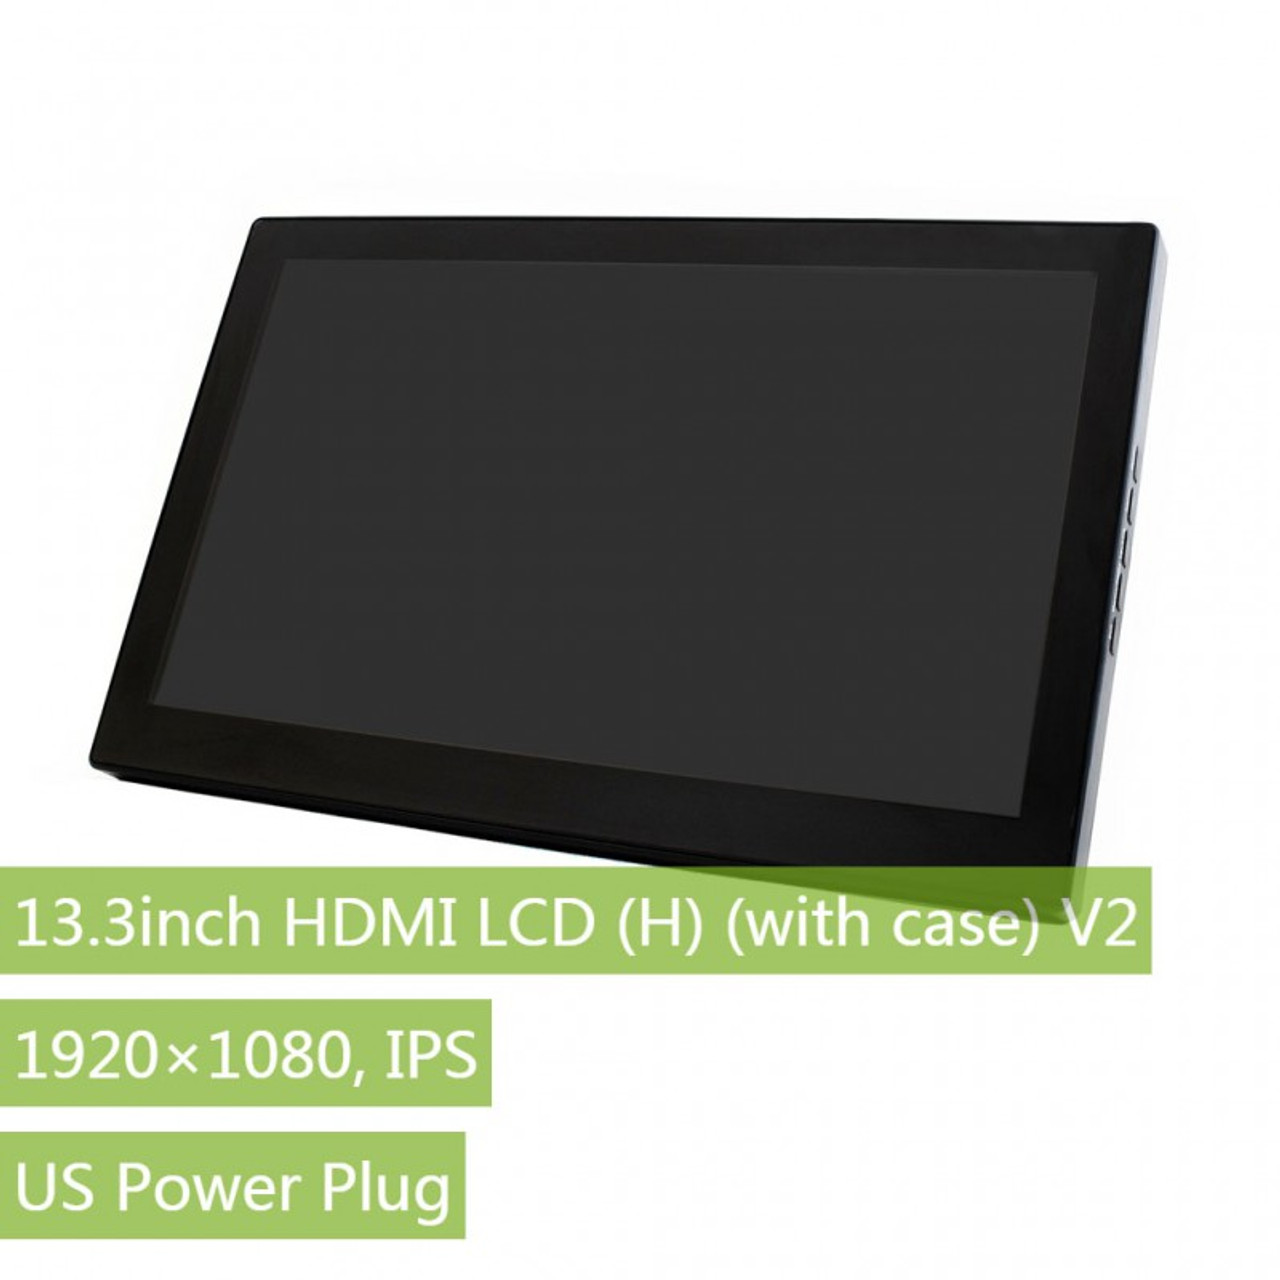 13.3inch HDMI LCD (H) (with case) V2, 1920x1080, IPS